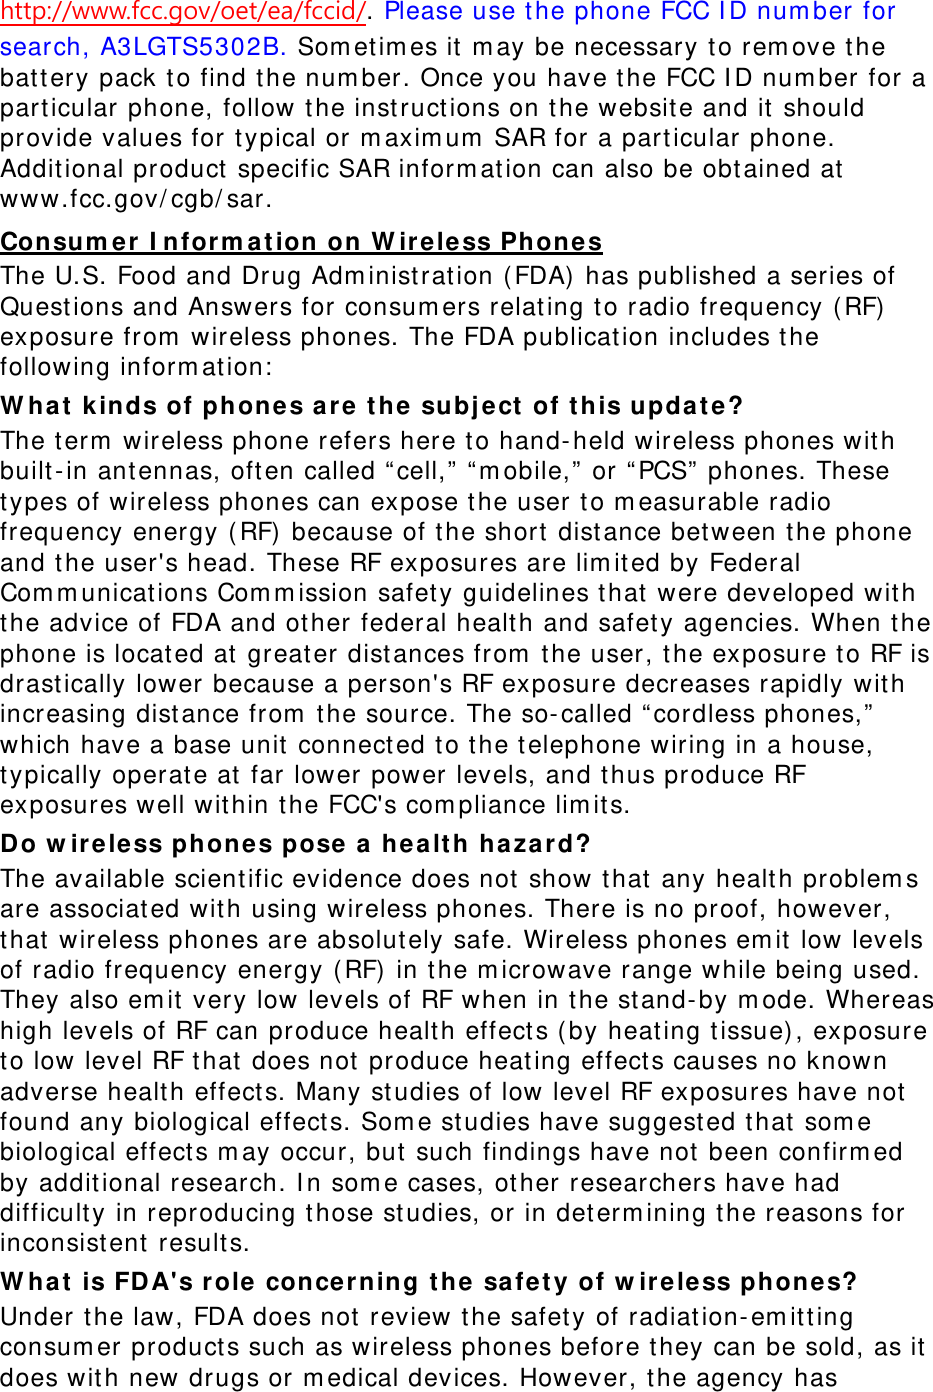 http://www.fcc.gov/oet/ea/fccid/. Please use t he phone FCC I D num ber for search, A3LGTS5302B. Som et im es it  m ay be necessary to rem ove t he battery pack t o find t he num ber. Once you have t he FCC I D num ber for a particular phone, follow the inst ruct ions on the websit e and it  should provide values for typical or m axim um  SAR for a particular phone. Additional product  specific SAR inform at ion can also be obt ained at www.fcc.gov/ cgb/ sar. Consum er  I nfor m at ion on W ir eless Phones The U.S. Food and Drug Adm inist rat ion ( FDA)  has published a series of Quest ions and Answers for consum ers relat ing to radio frequency ( RF)  exposure from  wireless phones. The FDA publicat ion includes the following inform ation:  W ha t  k inds of phon es a re t he  subj ect  of t his updat e? The t erm  wireless phone refers here t o hand- held wireless phones wit h built- in ant ennas, oft en called “ cell,”  “ m obile,”  or “ PCS”  phones. These types of wireless phones can expose t he user to m easurable radio frequency energy ( RF)  because of t he short dist ance bet ween the phone and t he user&apos;s head. These RF exposures are lim it ed by Federal Com m unicat ions Com m ission safety guidelines that  were developed wit h the advice of FDA and ot her federal healt h and safet y agencies. When t he phone is located at great er dist ances from  the user, t he exposure t o RF is drastically lower because a person&apos;s RF exposure decreases rapidly wit h increasing dist ance from  the source. The so- called “ cordless phones,”  which have a base unit  connected to t he t elephone wiring in a house, typically operate at  far lower power levels, and thus produce RF exposures well wit hin the FCC&apos;s com pliance lim its. Do w irele ss phones pose a h ealt h hazard? The available scientific evidence does not  show t hat  any healt h problem s are associat ed wit h using wireless phones. There is no proof, however, that  wireless phones are absolut ely safe. Wireless phones em it  low levels of radio frequency energy ( RF) in t he m icrowave range while being used. They also em it  very low levels of RF when in t he st and- by m ode. Whereas high levels of RF can produce healt h effect s ( by heat ing t issue) , exposure to low level RF that  does not  produce heat ing effect s causes no known adverse healt h effect s. Many st udies of low level RF exposures have not  found any biological effects. Som e st udies have suggest ed t hat som e biological effect s m ay occur, but such findings have not  been confirm ed by addit ional research. I n som e cases, ot her researchers have had difficult y in reproducing t hose studies, or in det erm ining the reasons for inconsist ent  result s. W ha t  is FD A&apos;s role  concer ning t he safet y of w ir e less phones? Under the law, FDA does not  review t he safet y of radiat ion- em it t ing consum er product s such as wireless phones before t hey can be sold, as it  does wit h new drugs or m edical devices. However, t he agency has 